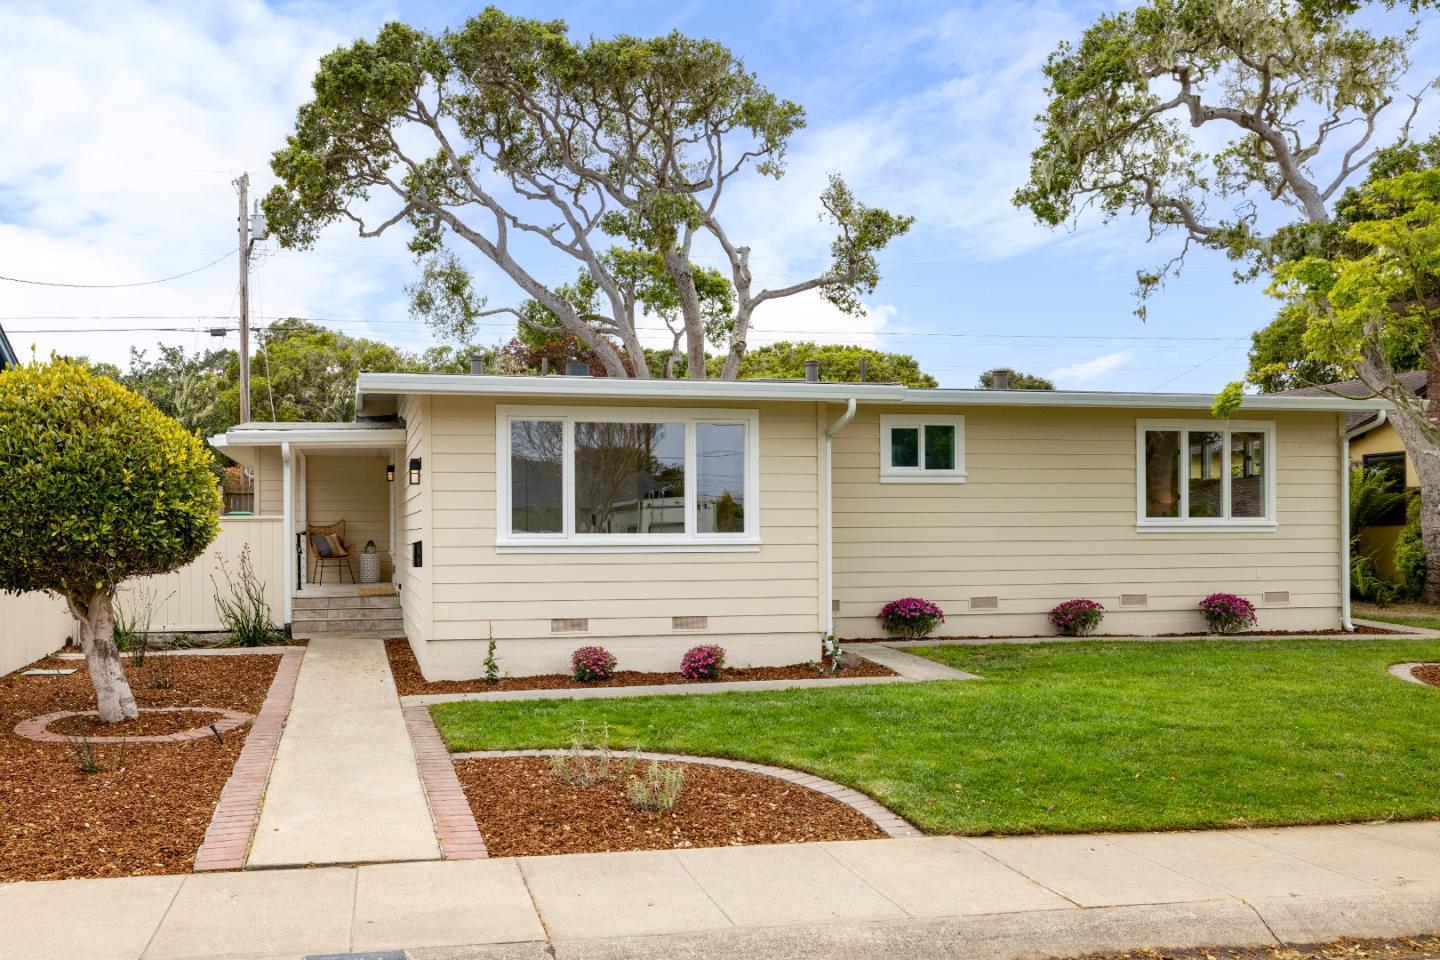 Photo of 721 Hillcrest Ave in Pacific Grove, CA